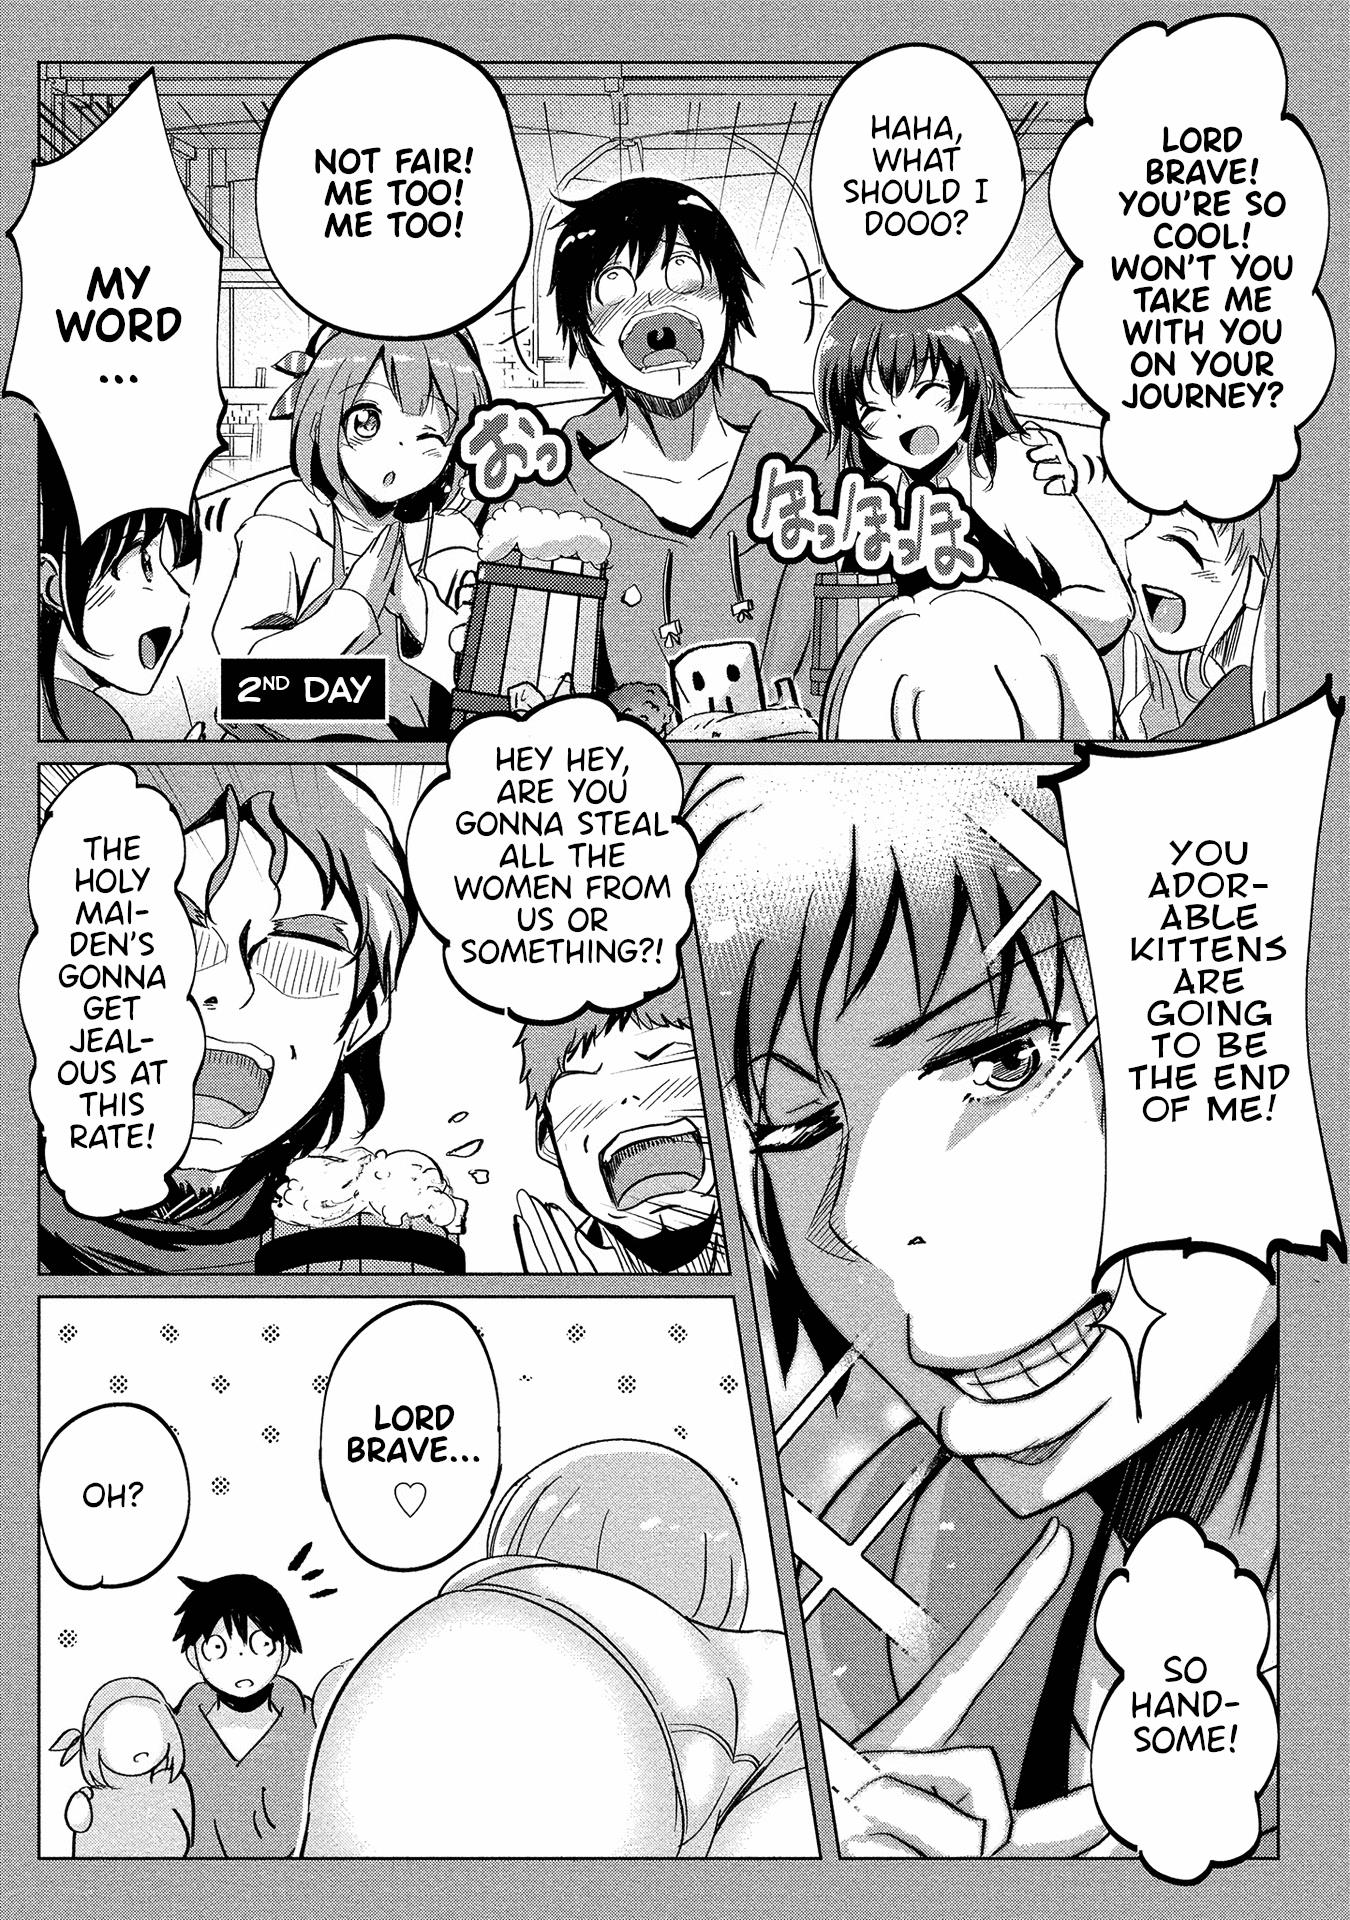 Dunking On Succubi In Another World - Page 1